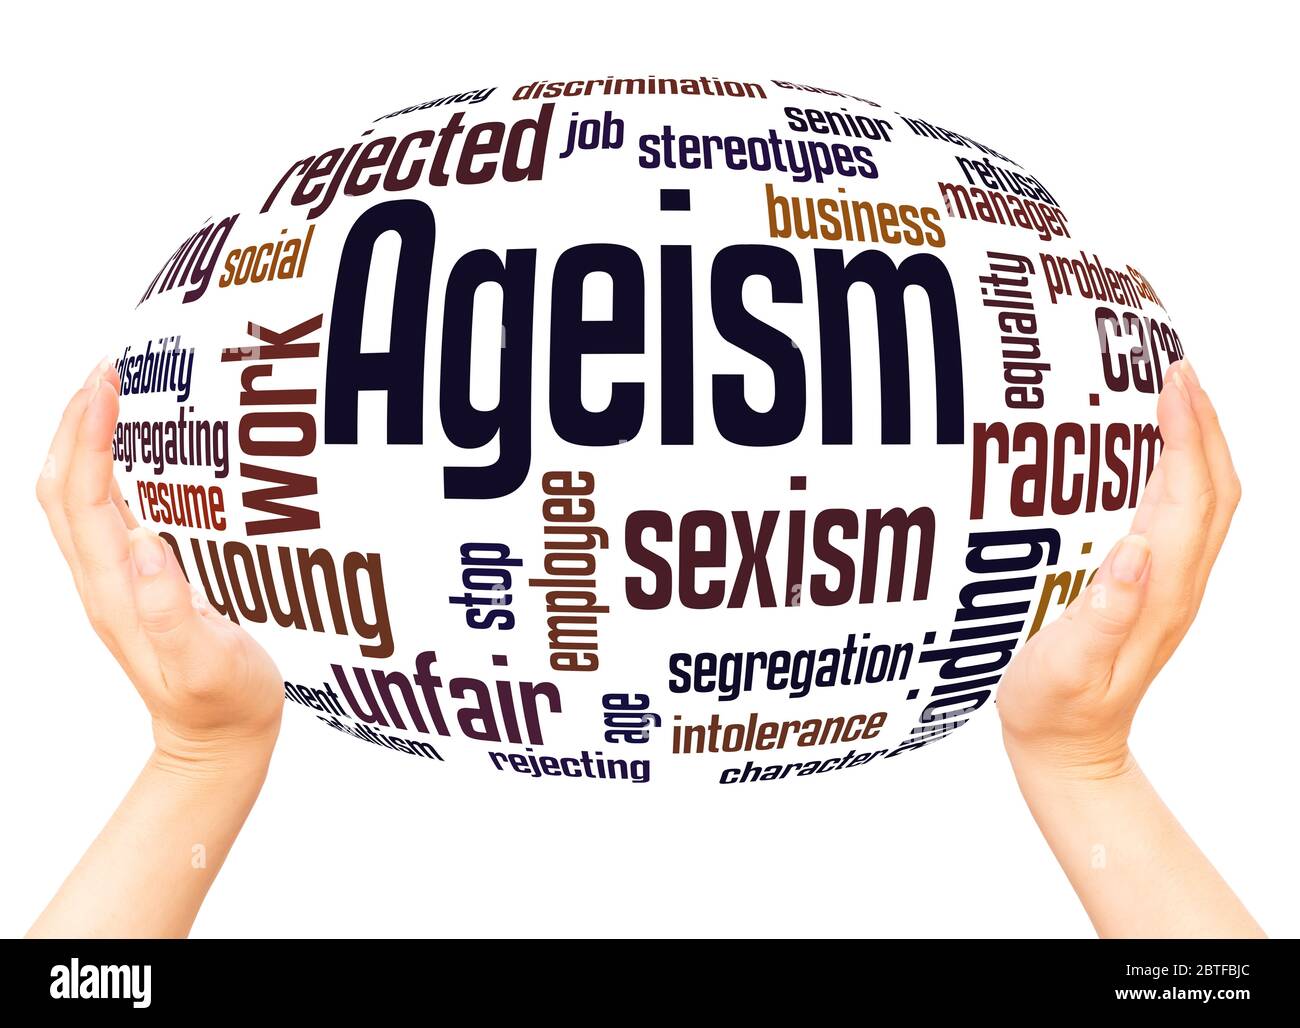 Ageism word hand sphere cloud concept on white background. Stock Photo